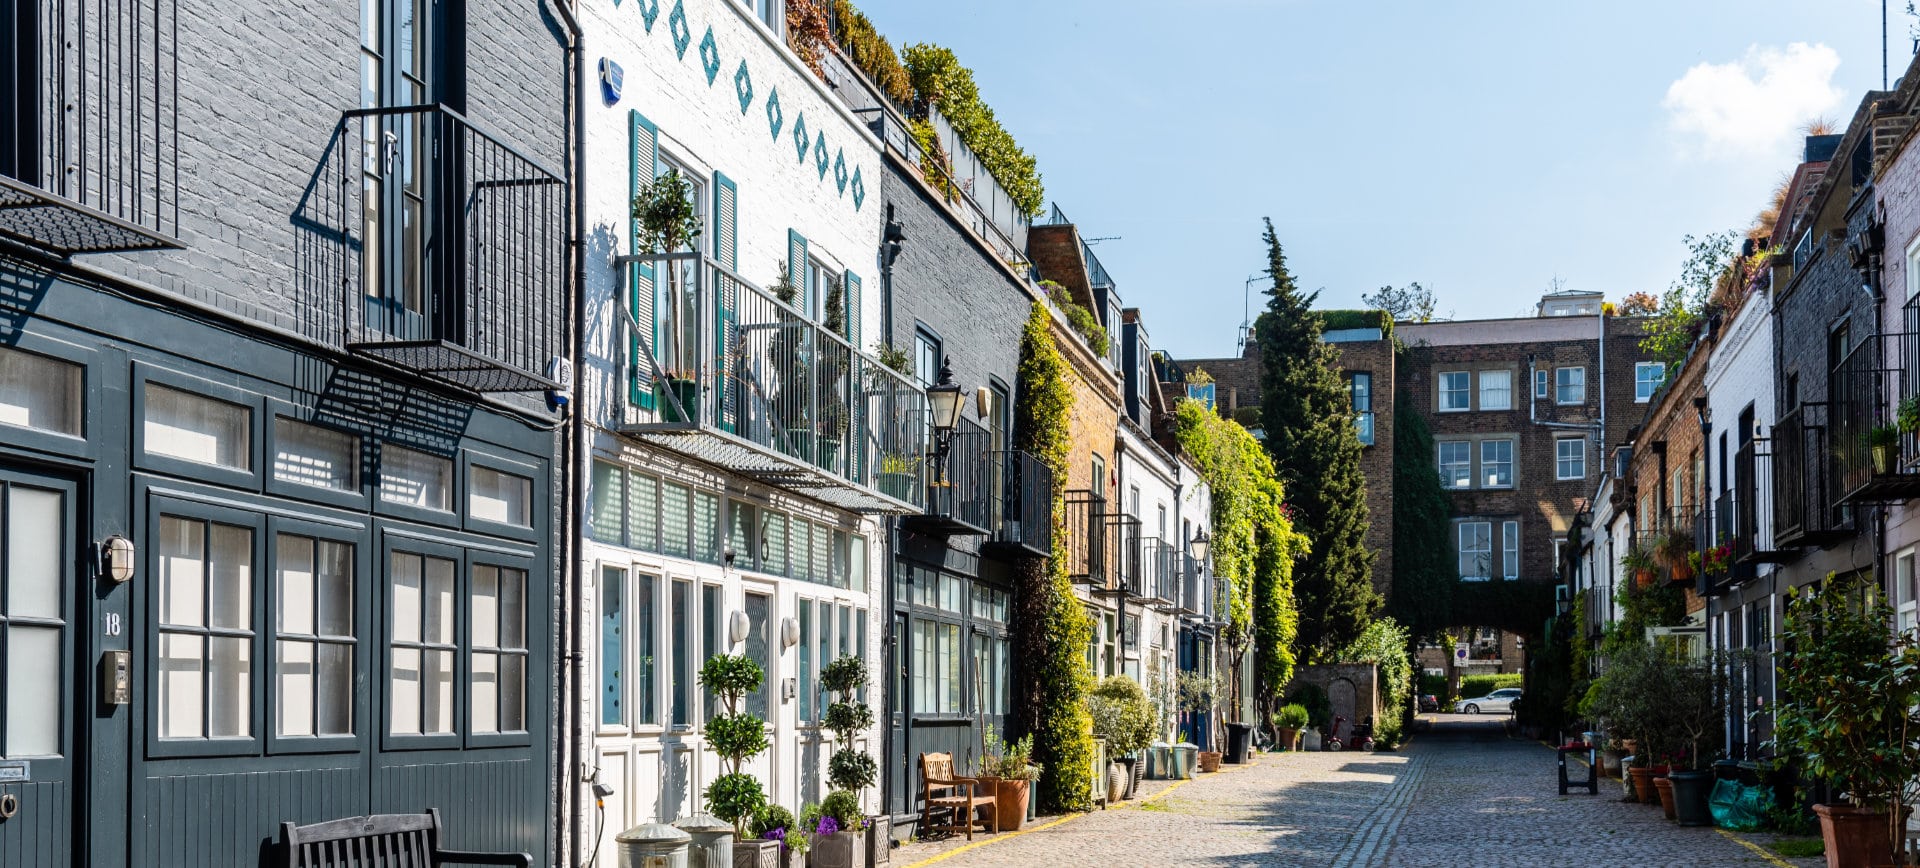 View of the picturesque St Lukes Mews alley in London